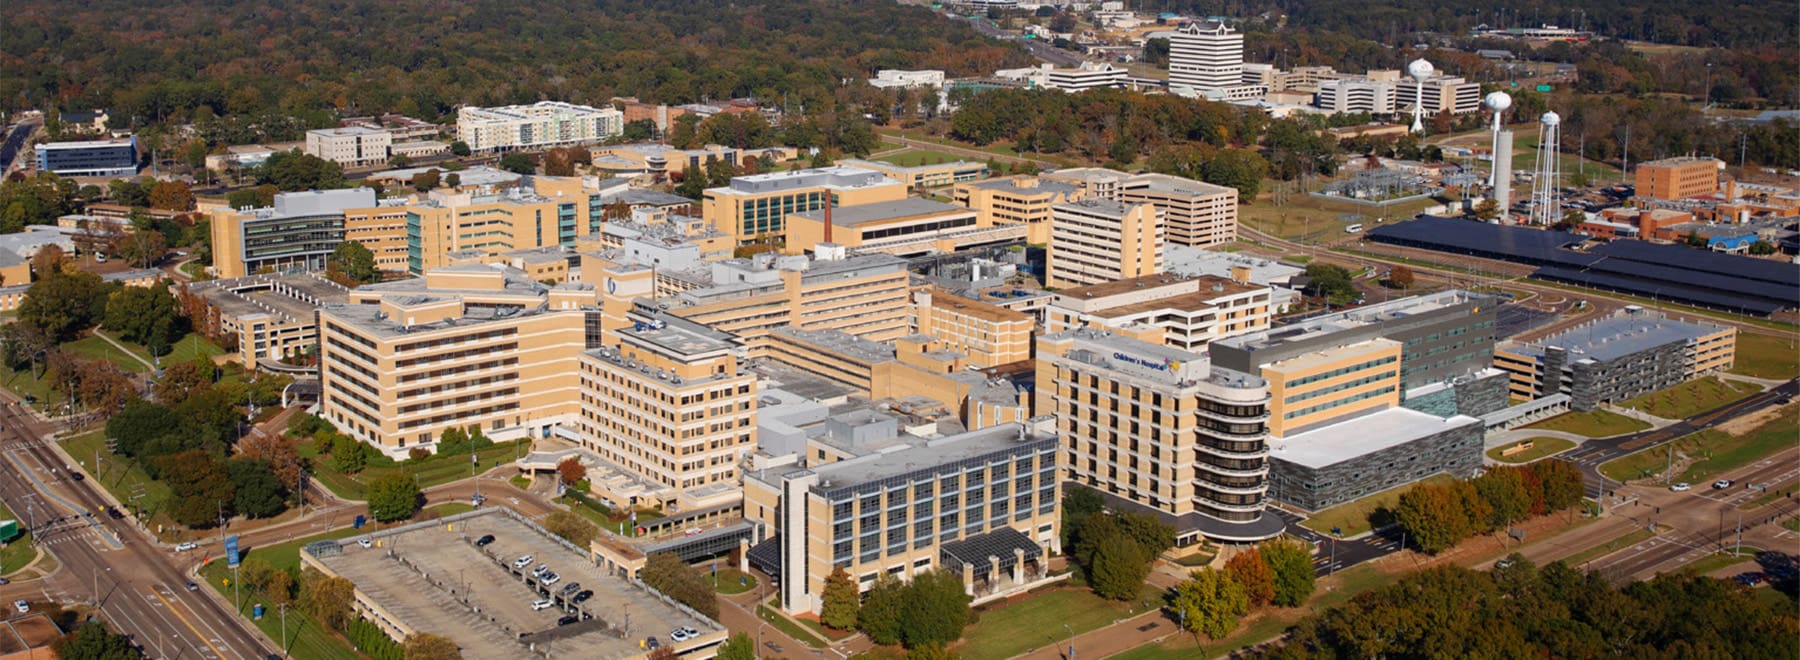 Daytime aerial view of the University of Mississippi Medical Center.